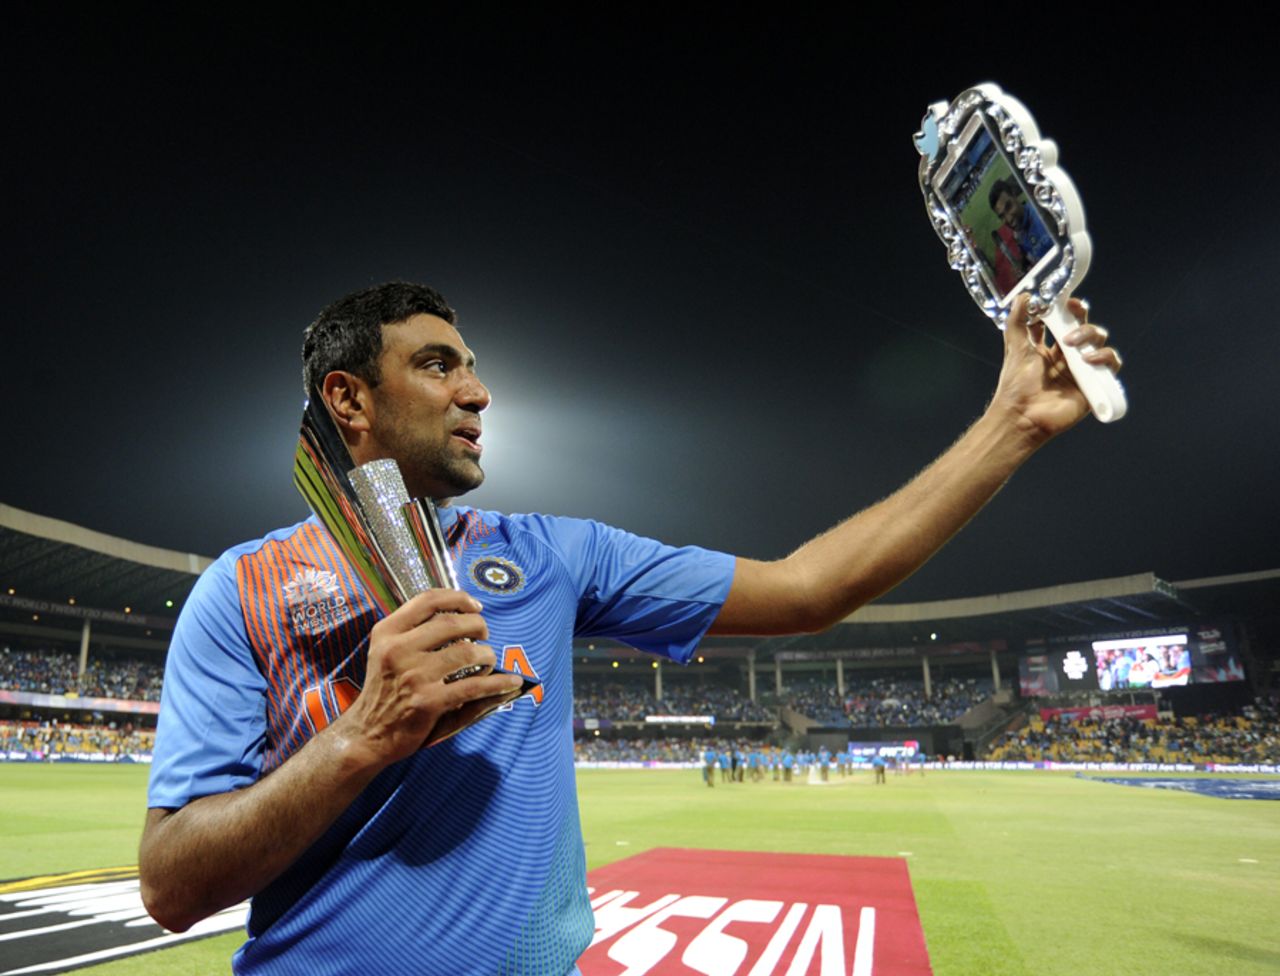 R Ashwin takes a selfie with his Man-of-the-Match trophy, India v Bangladesh, World T20 2016, Group B, Bangalore, March 23, 2016